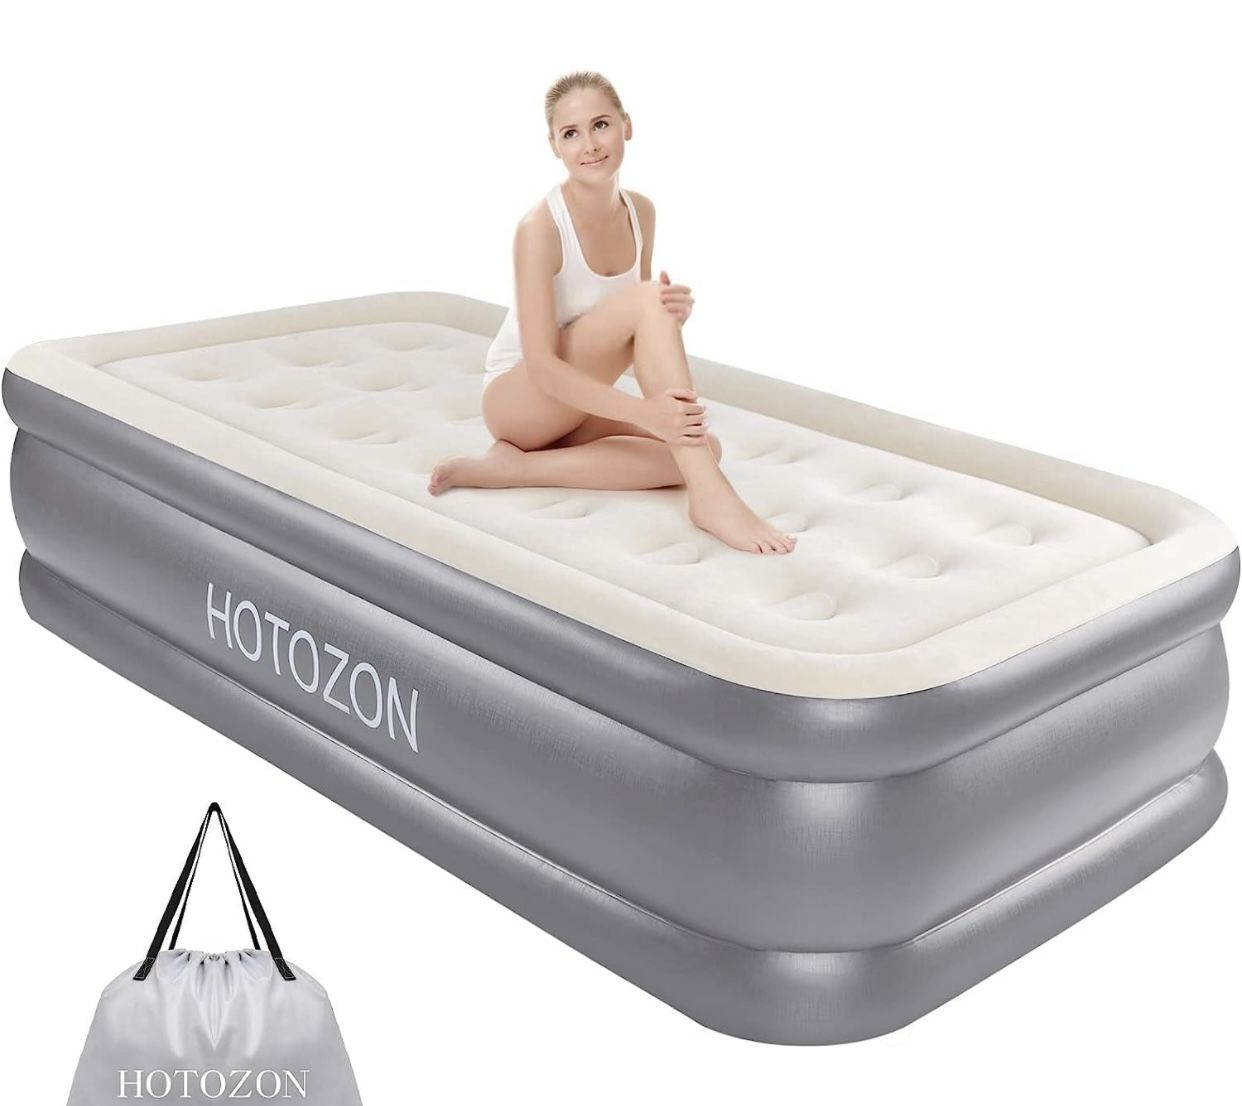 HOTOZON Twin Air Mattress with Built-in Pump, 18" Foldable Air Bed with Carry Bag, Luxury Elevated Inflatable Air Mattresses, Blow Up Airbed for Home,